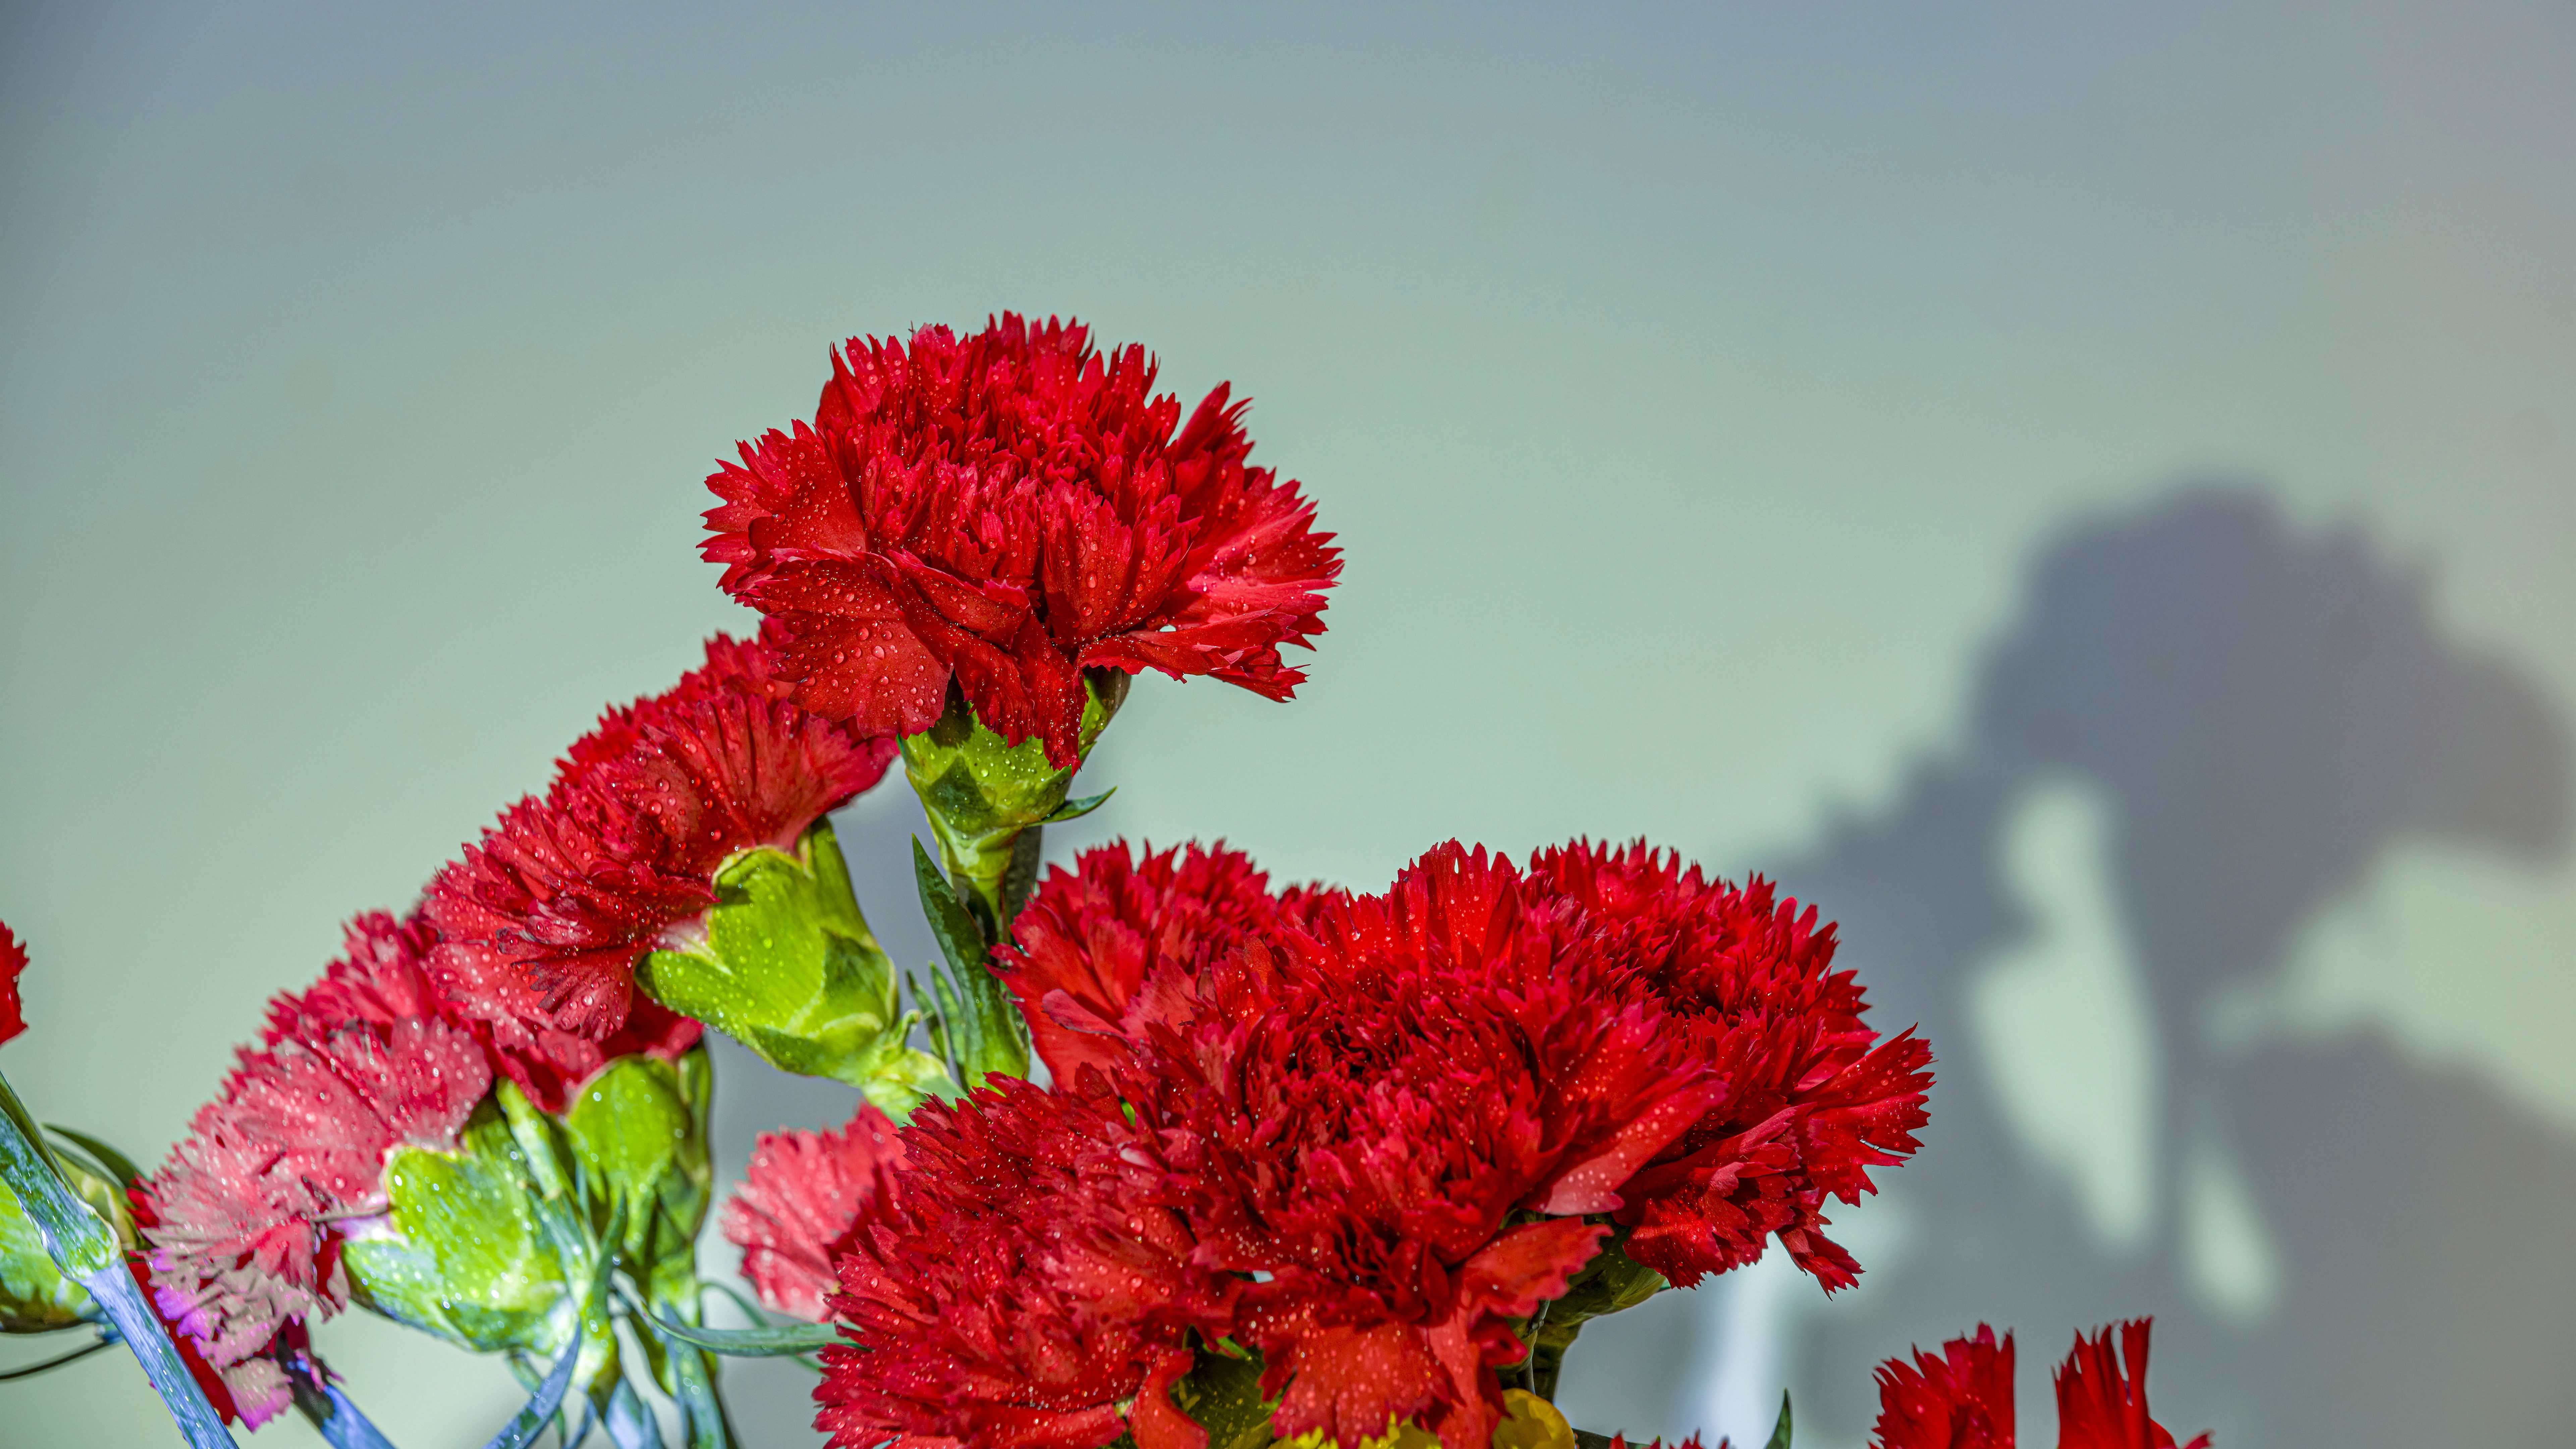 Wallpapers Red carnation flowers, water droplets 7680x4320 UHD 8K Picture, Image